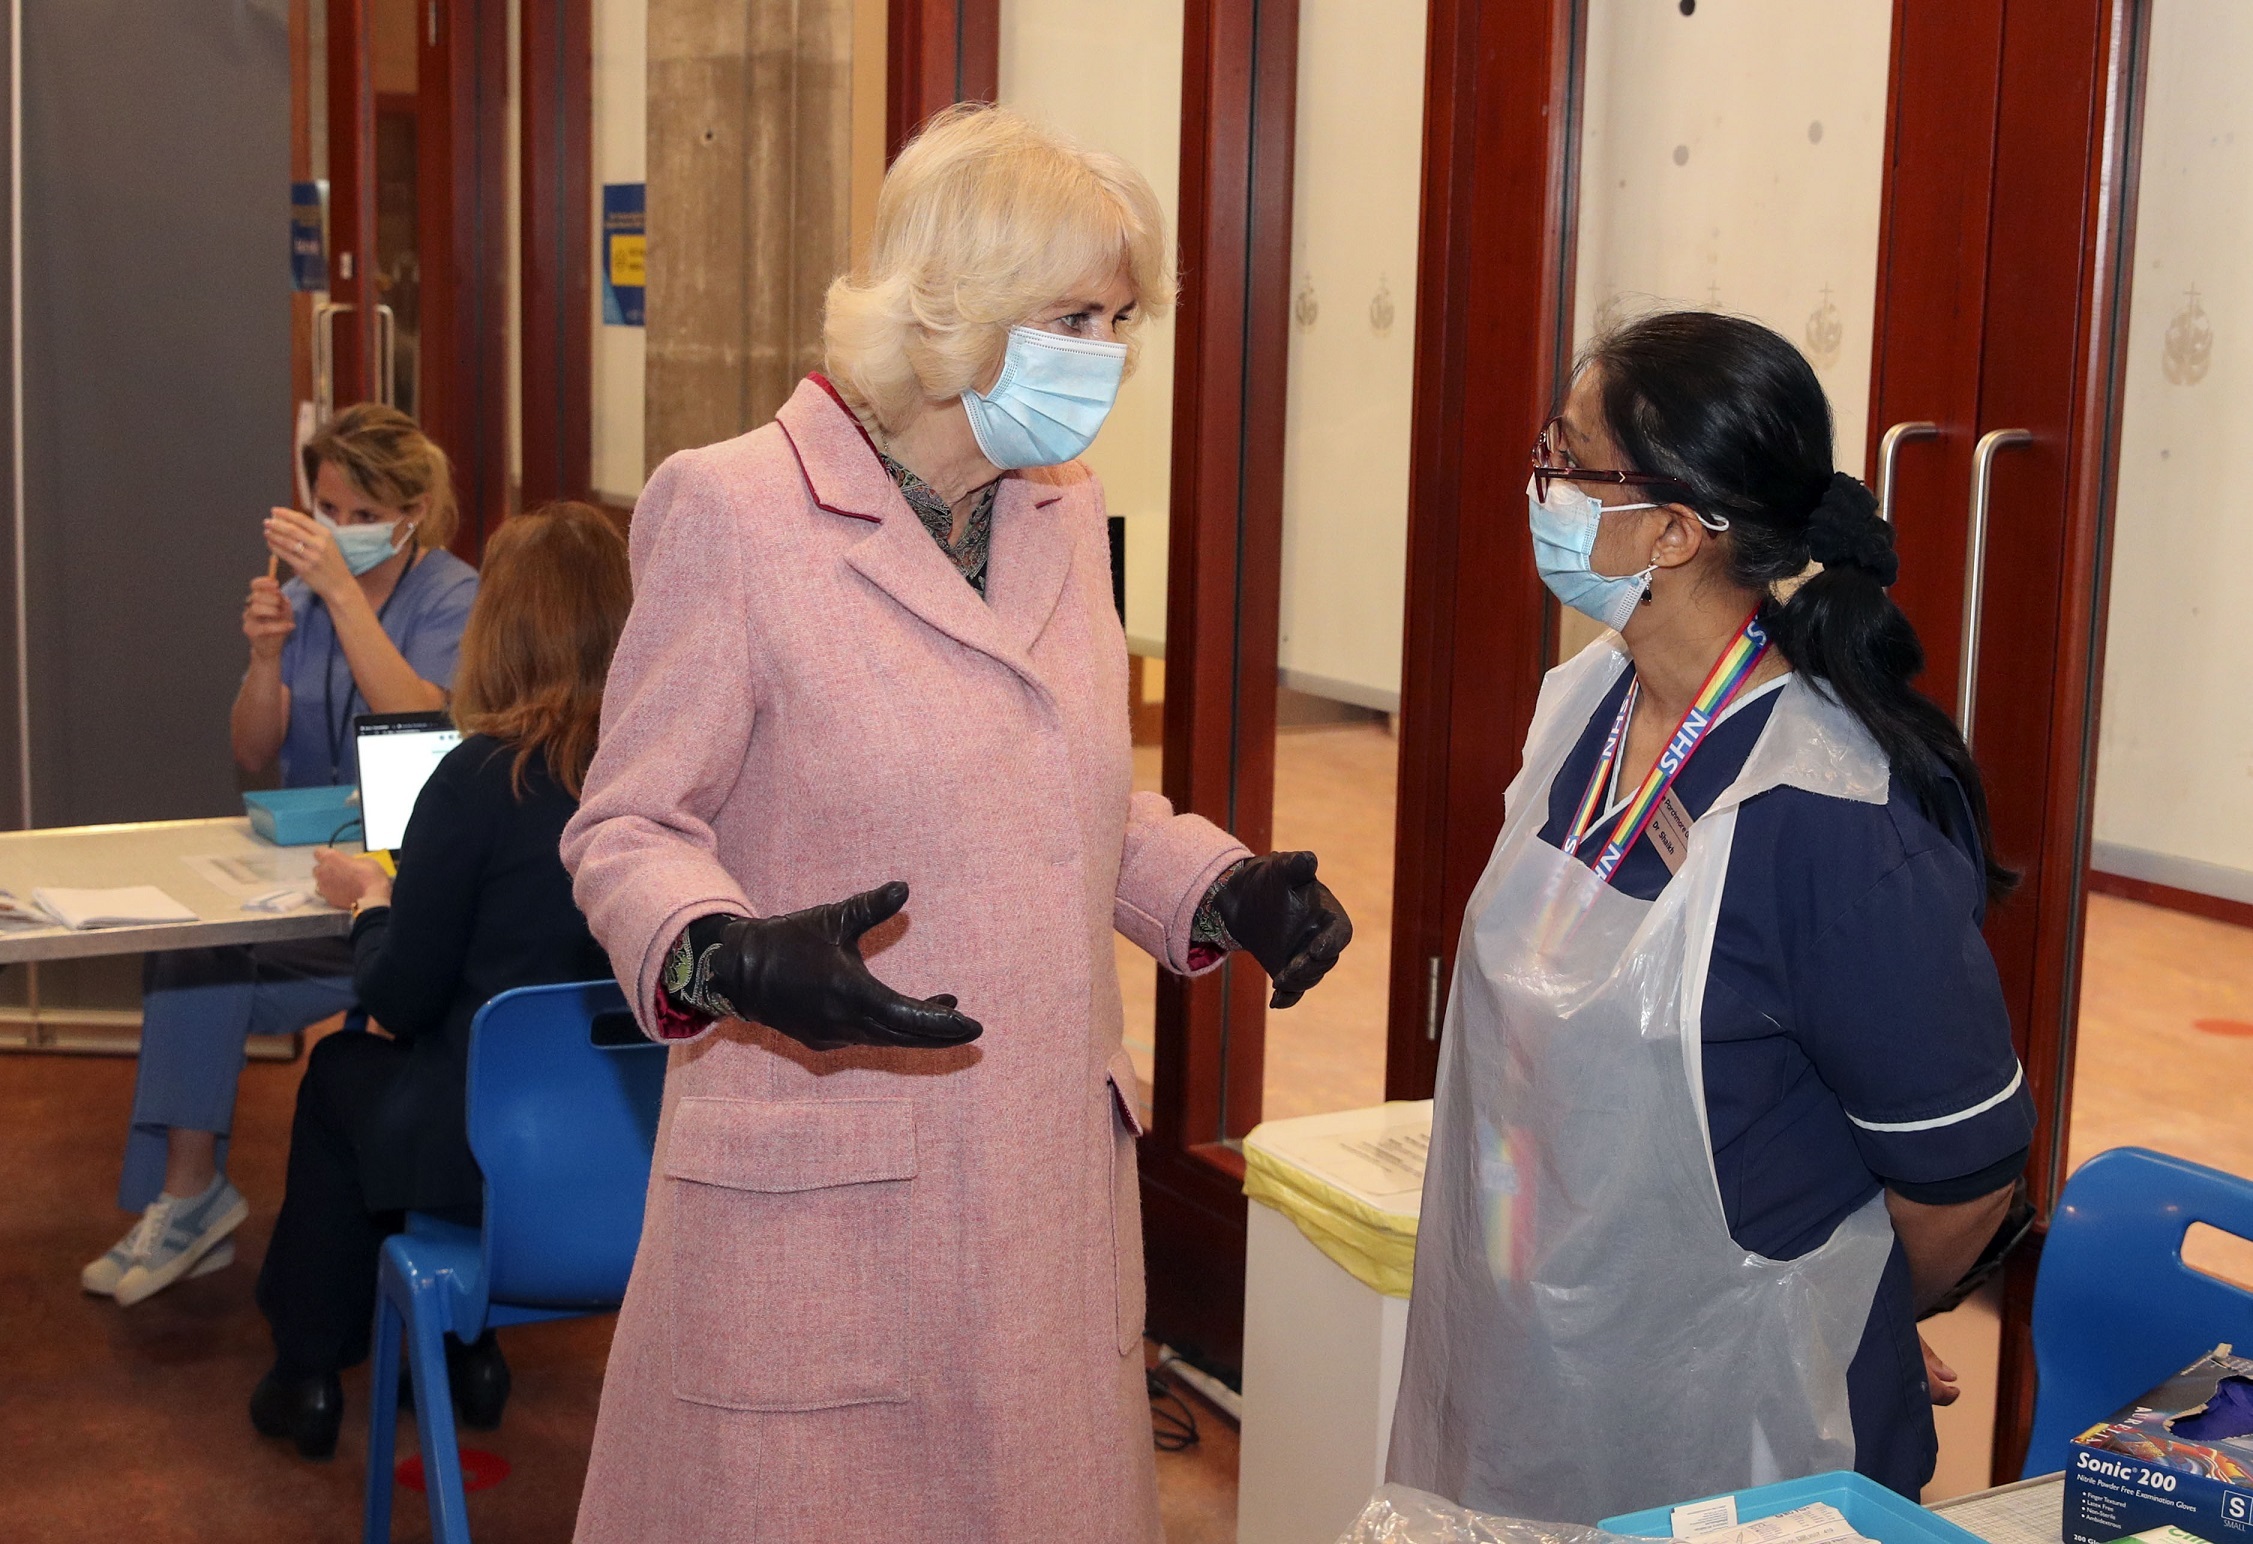 The Duchess of Cornwall talks to Dr Shaikh (right) during a visit to the Community Vaccination Centre at St Pauls Church